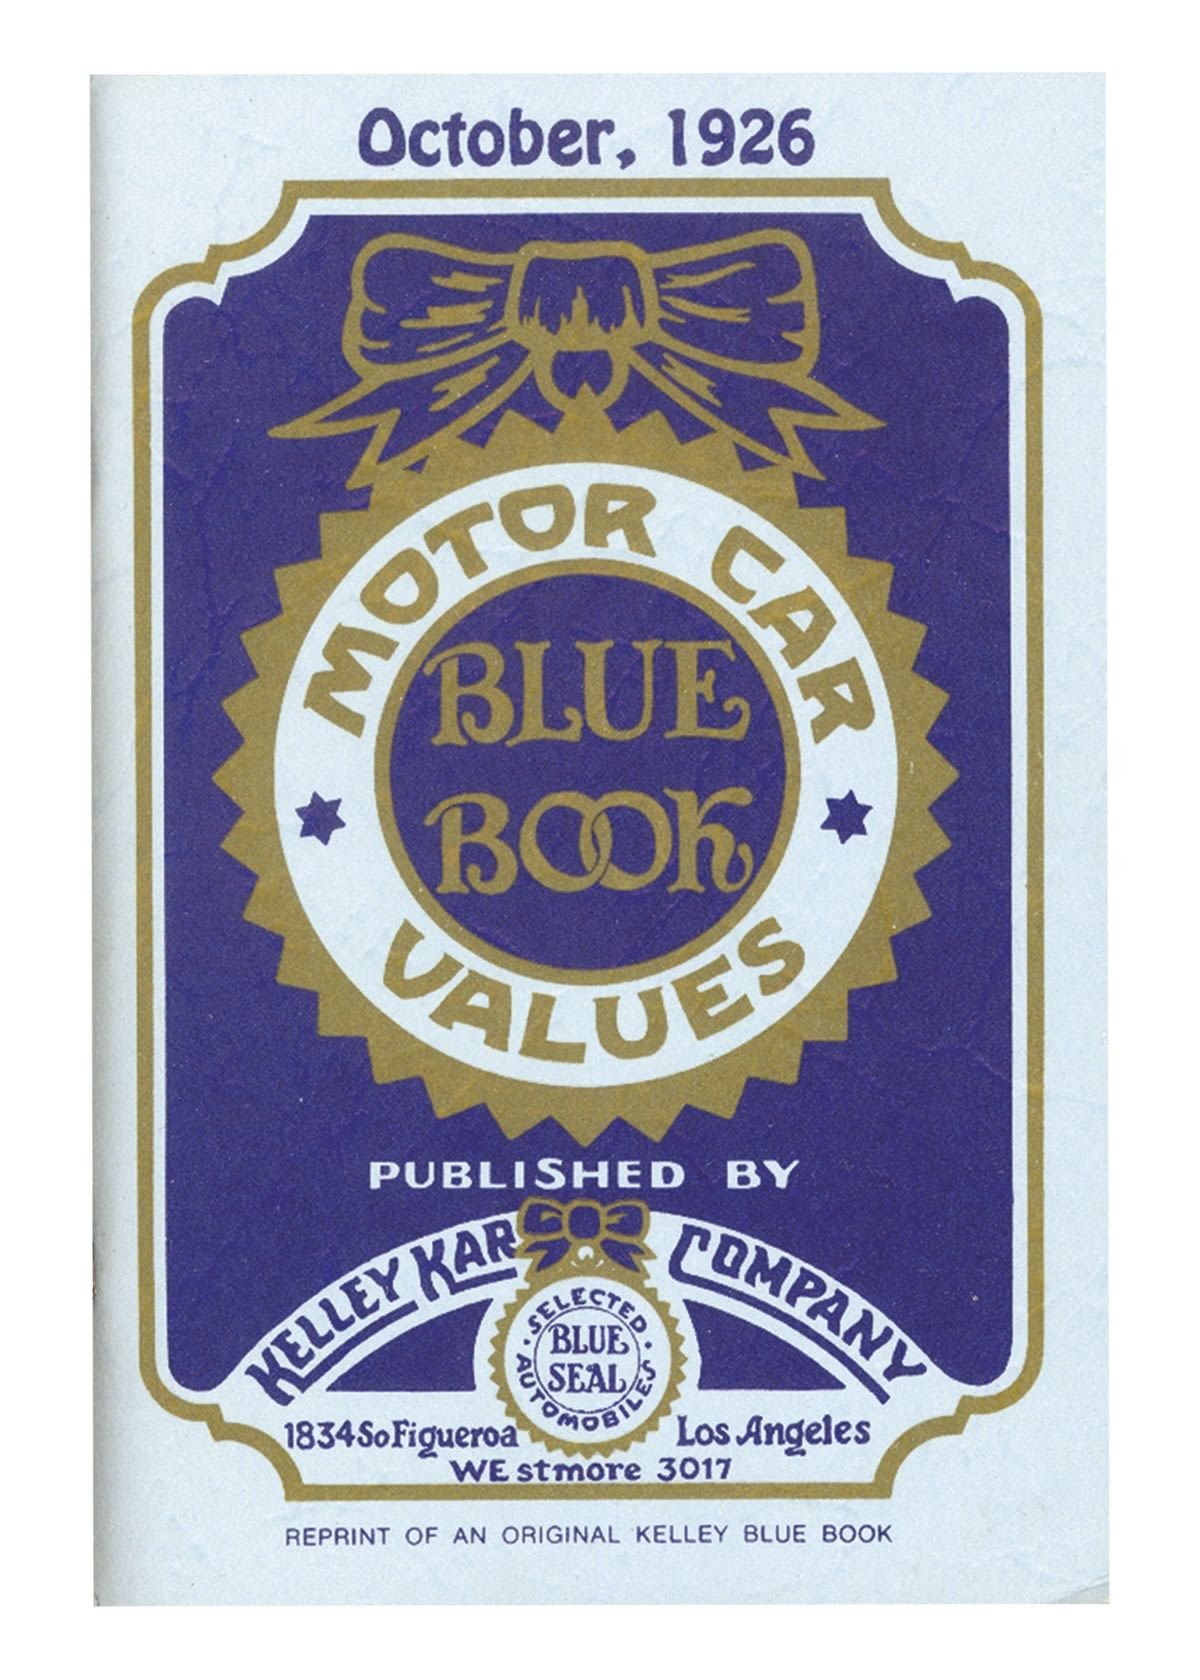 <i>Cox Automotive/Kelley Blue Book via CNN Newsource</i><br/>The Kelley Blue Book logo as it appeared on a 1926 pricing guide.